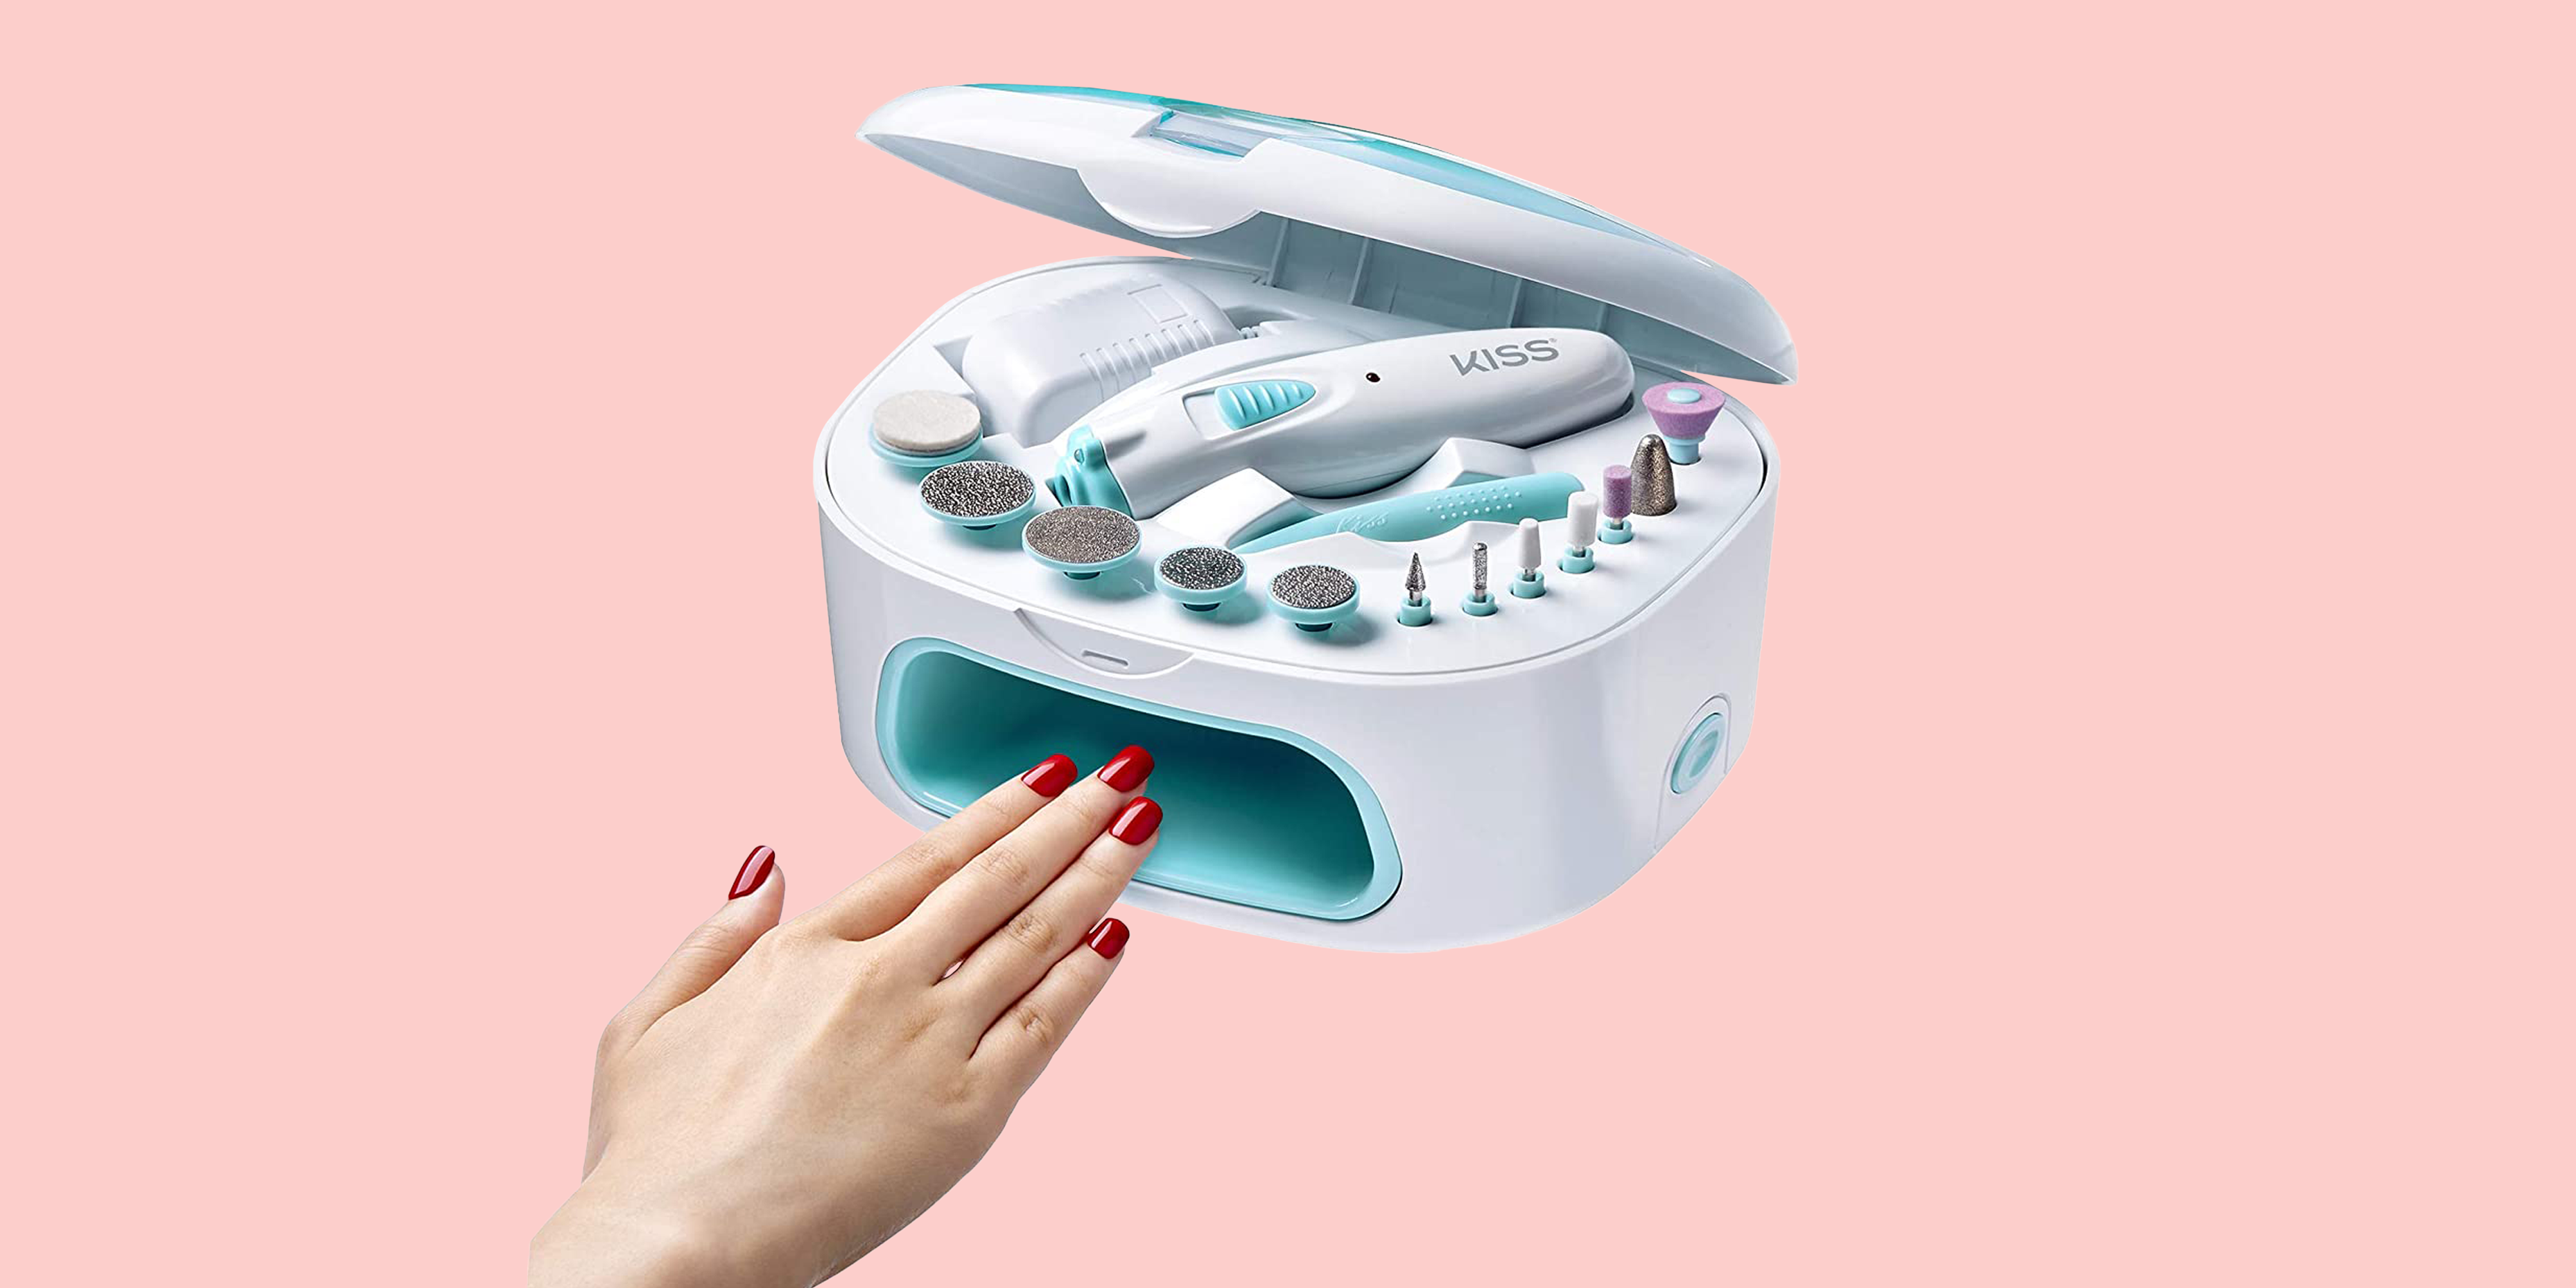 Nail Care Market Trends: What's Hot and What's Not